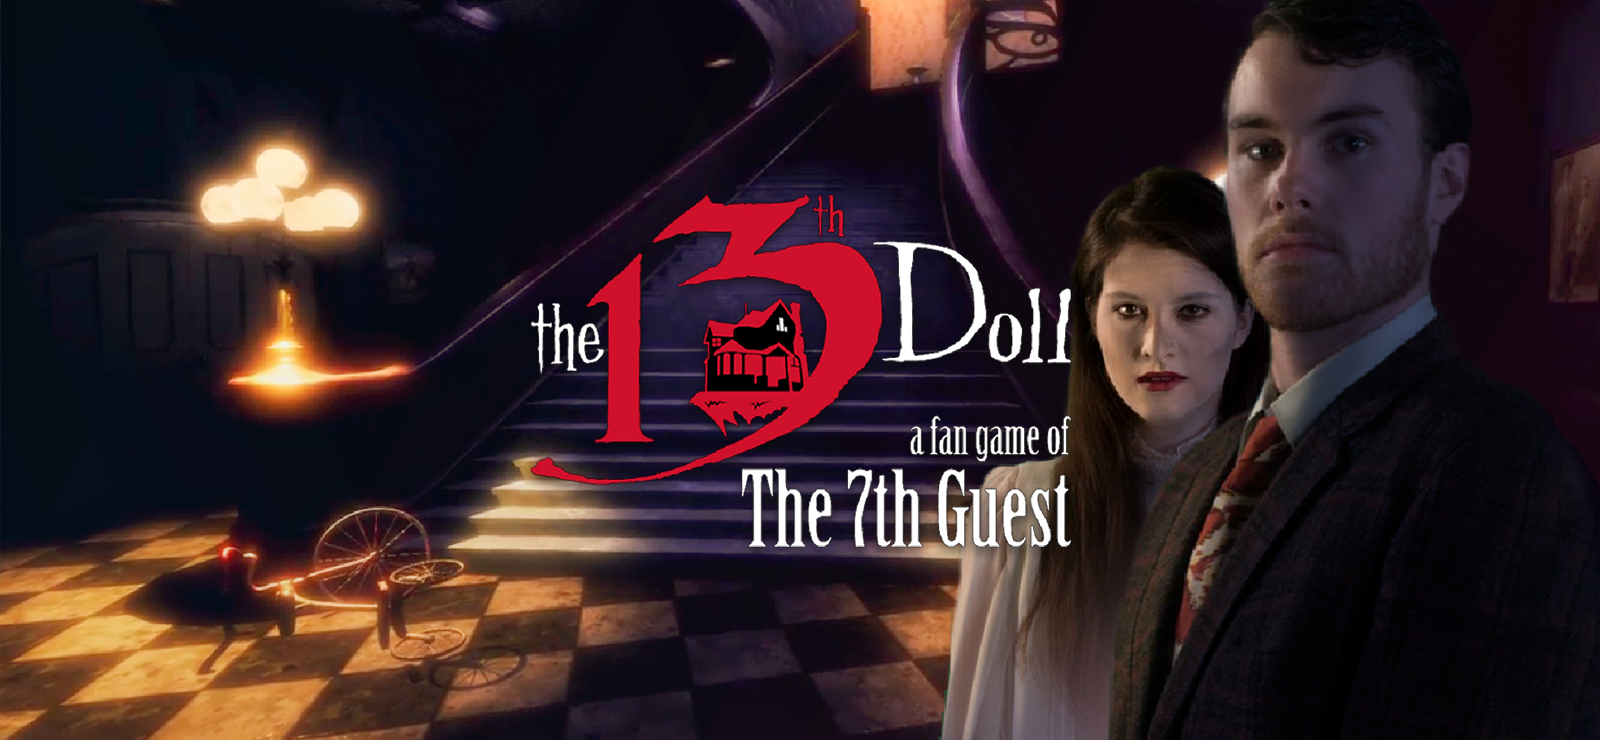 The 13th Doll: A Fan Game Of The 7th Guest